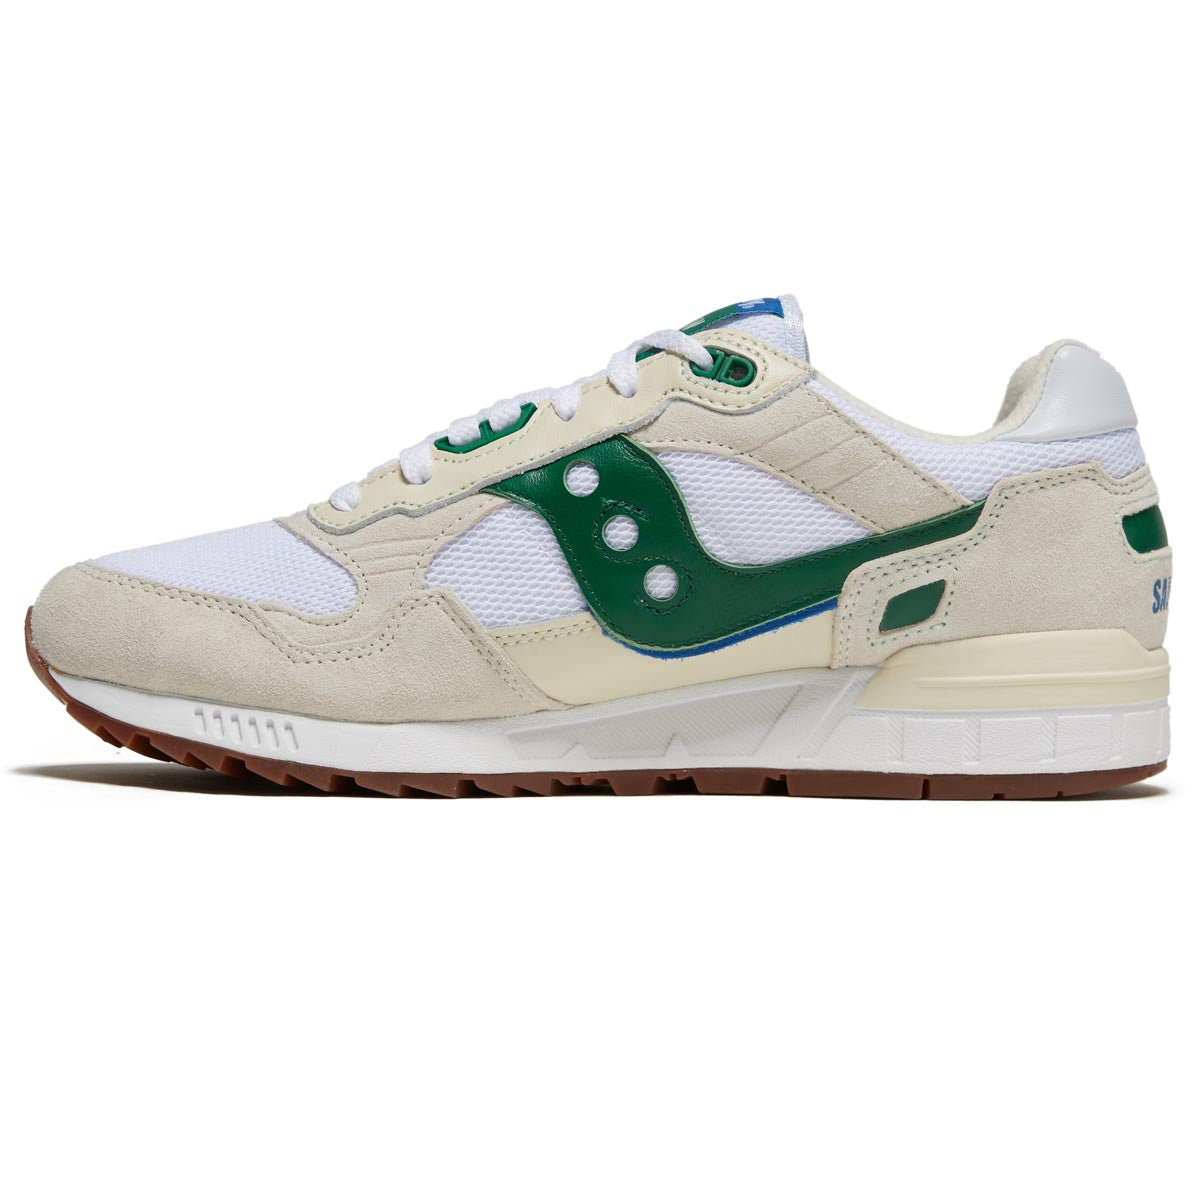 Saucony Shadow 5000 Shoes - White/Green image 2